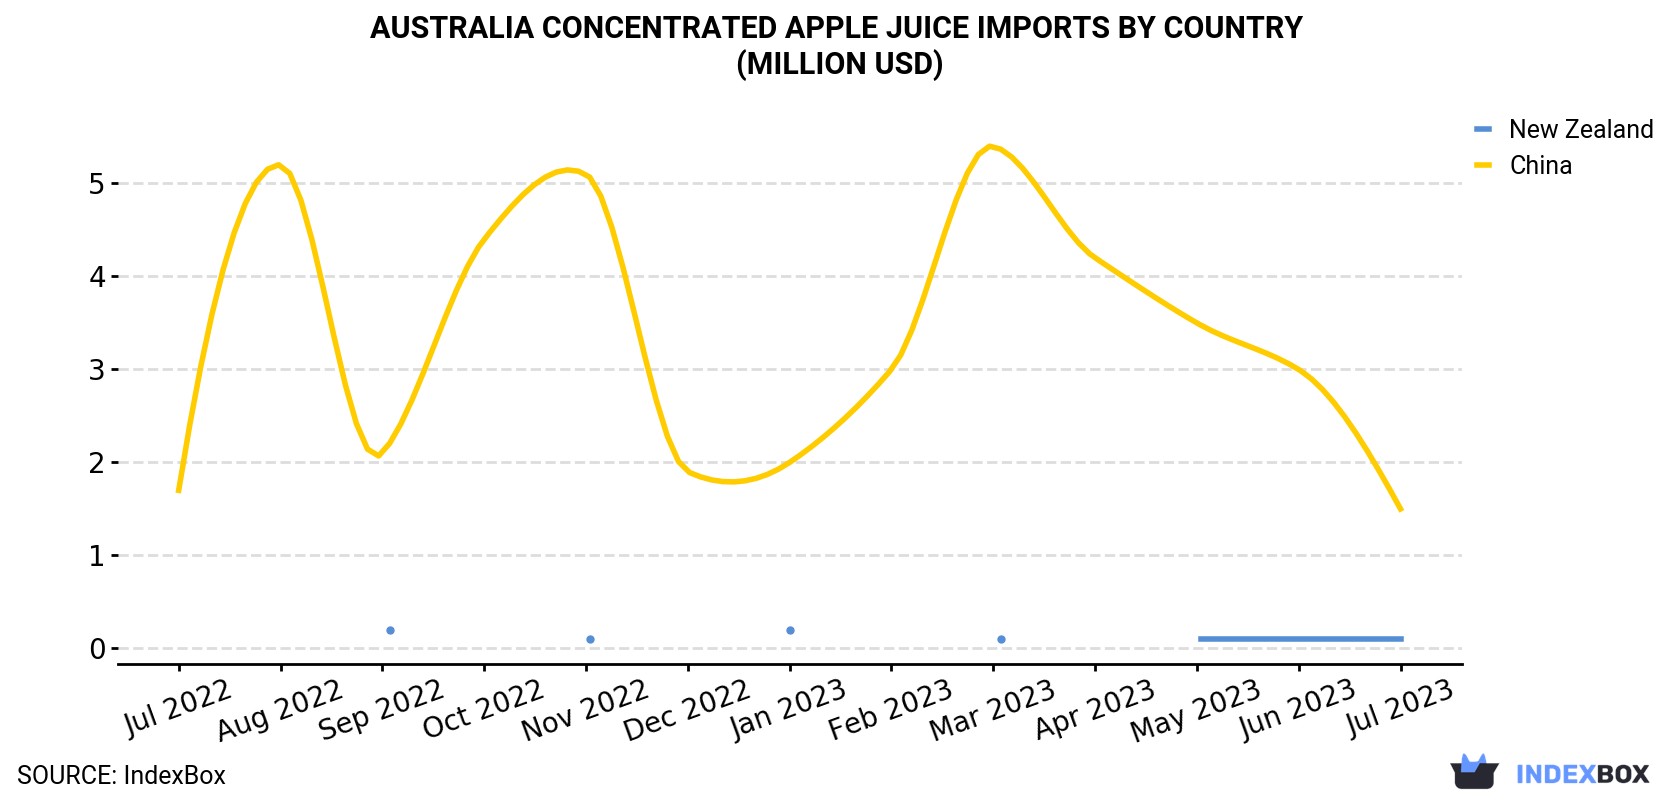 Australia Concentrated Apple Juice Imports By Country (Million USD)